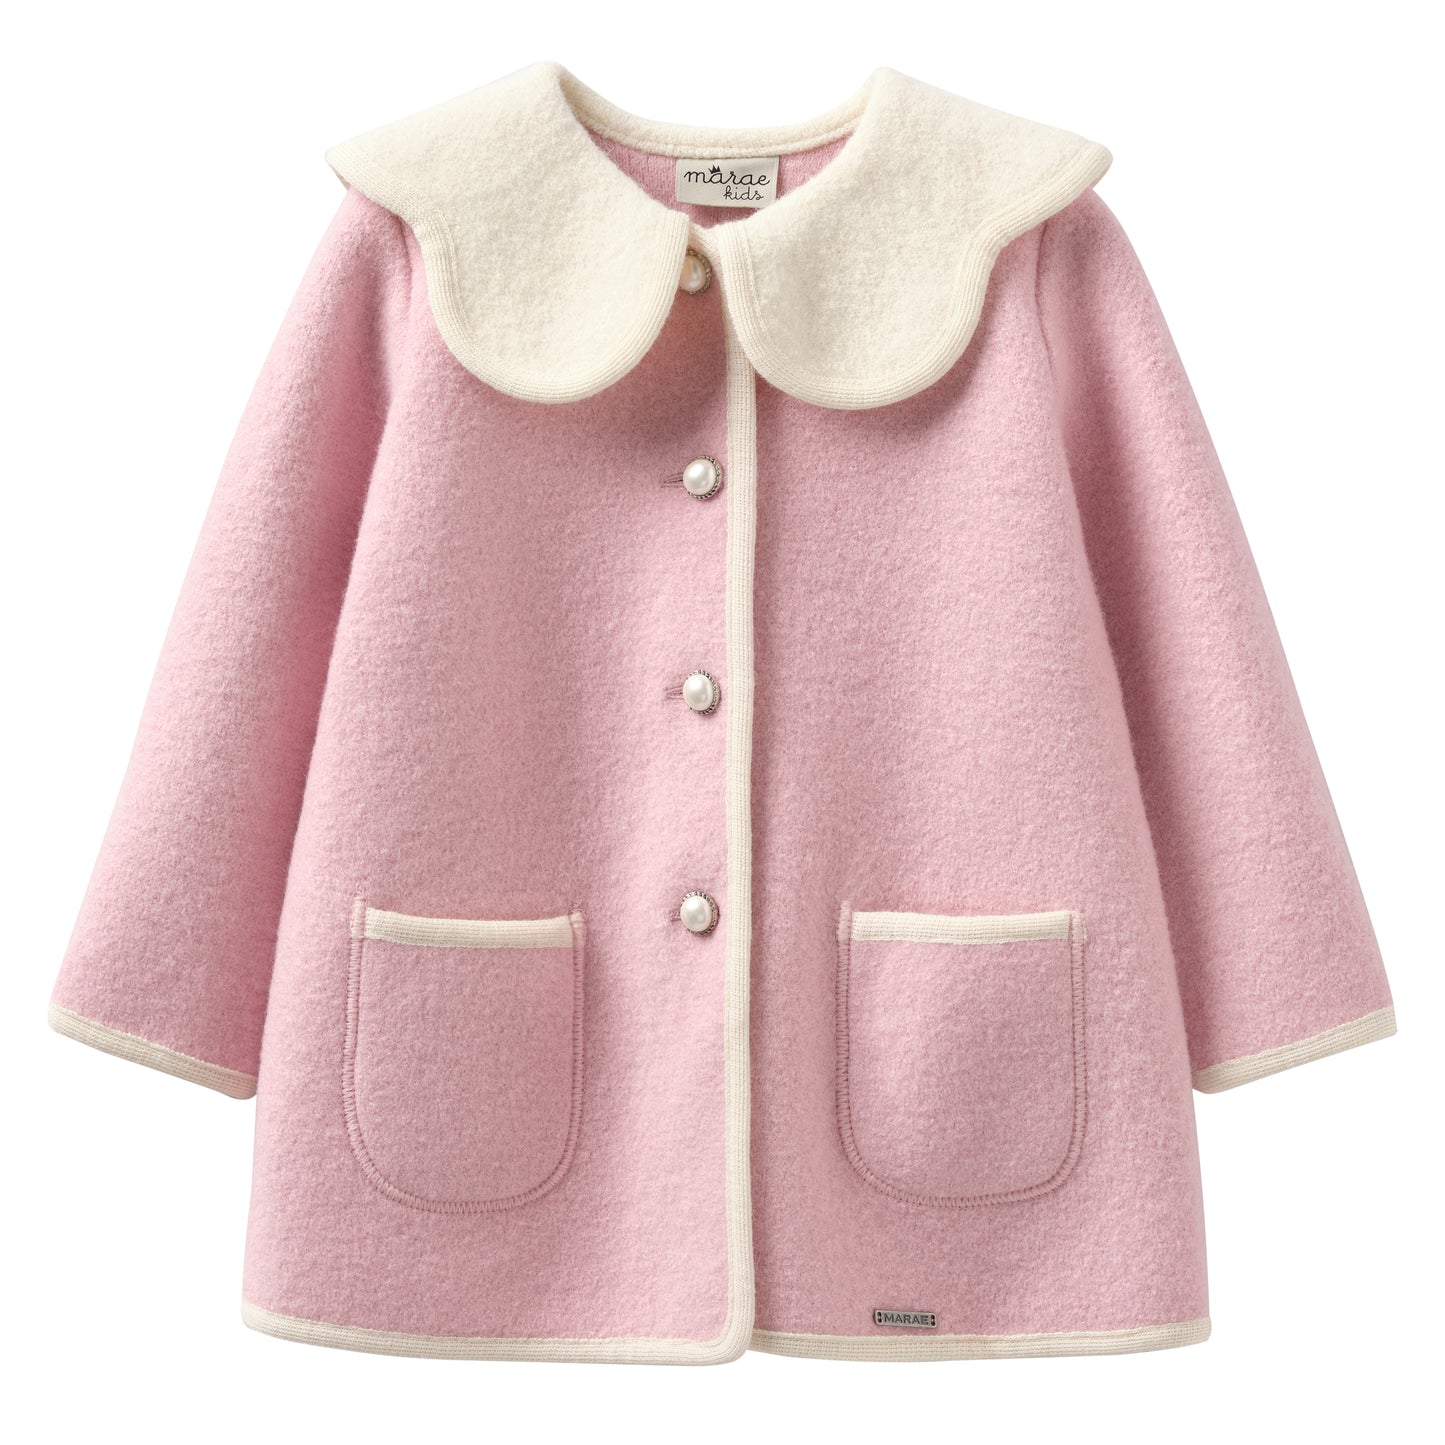 Marae Pink and Ivory Coat with Scalloped Collar